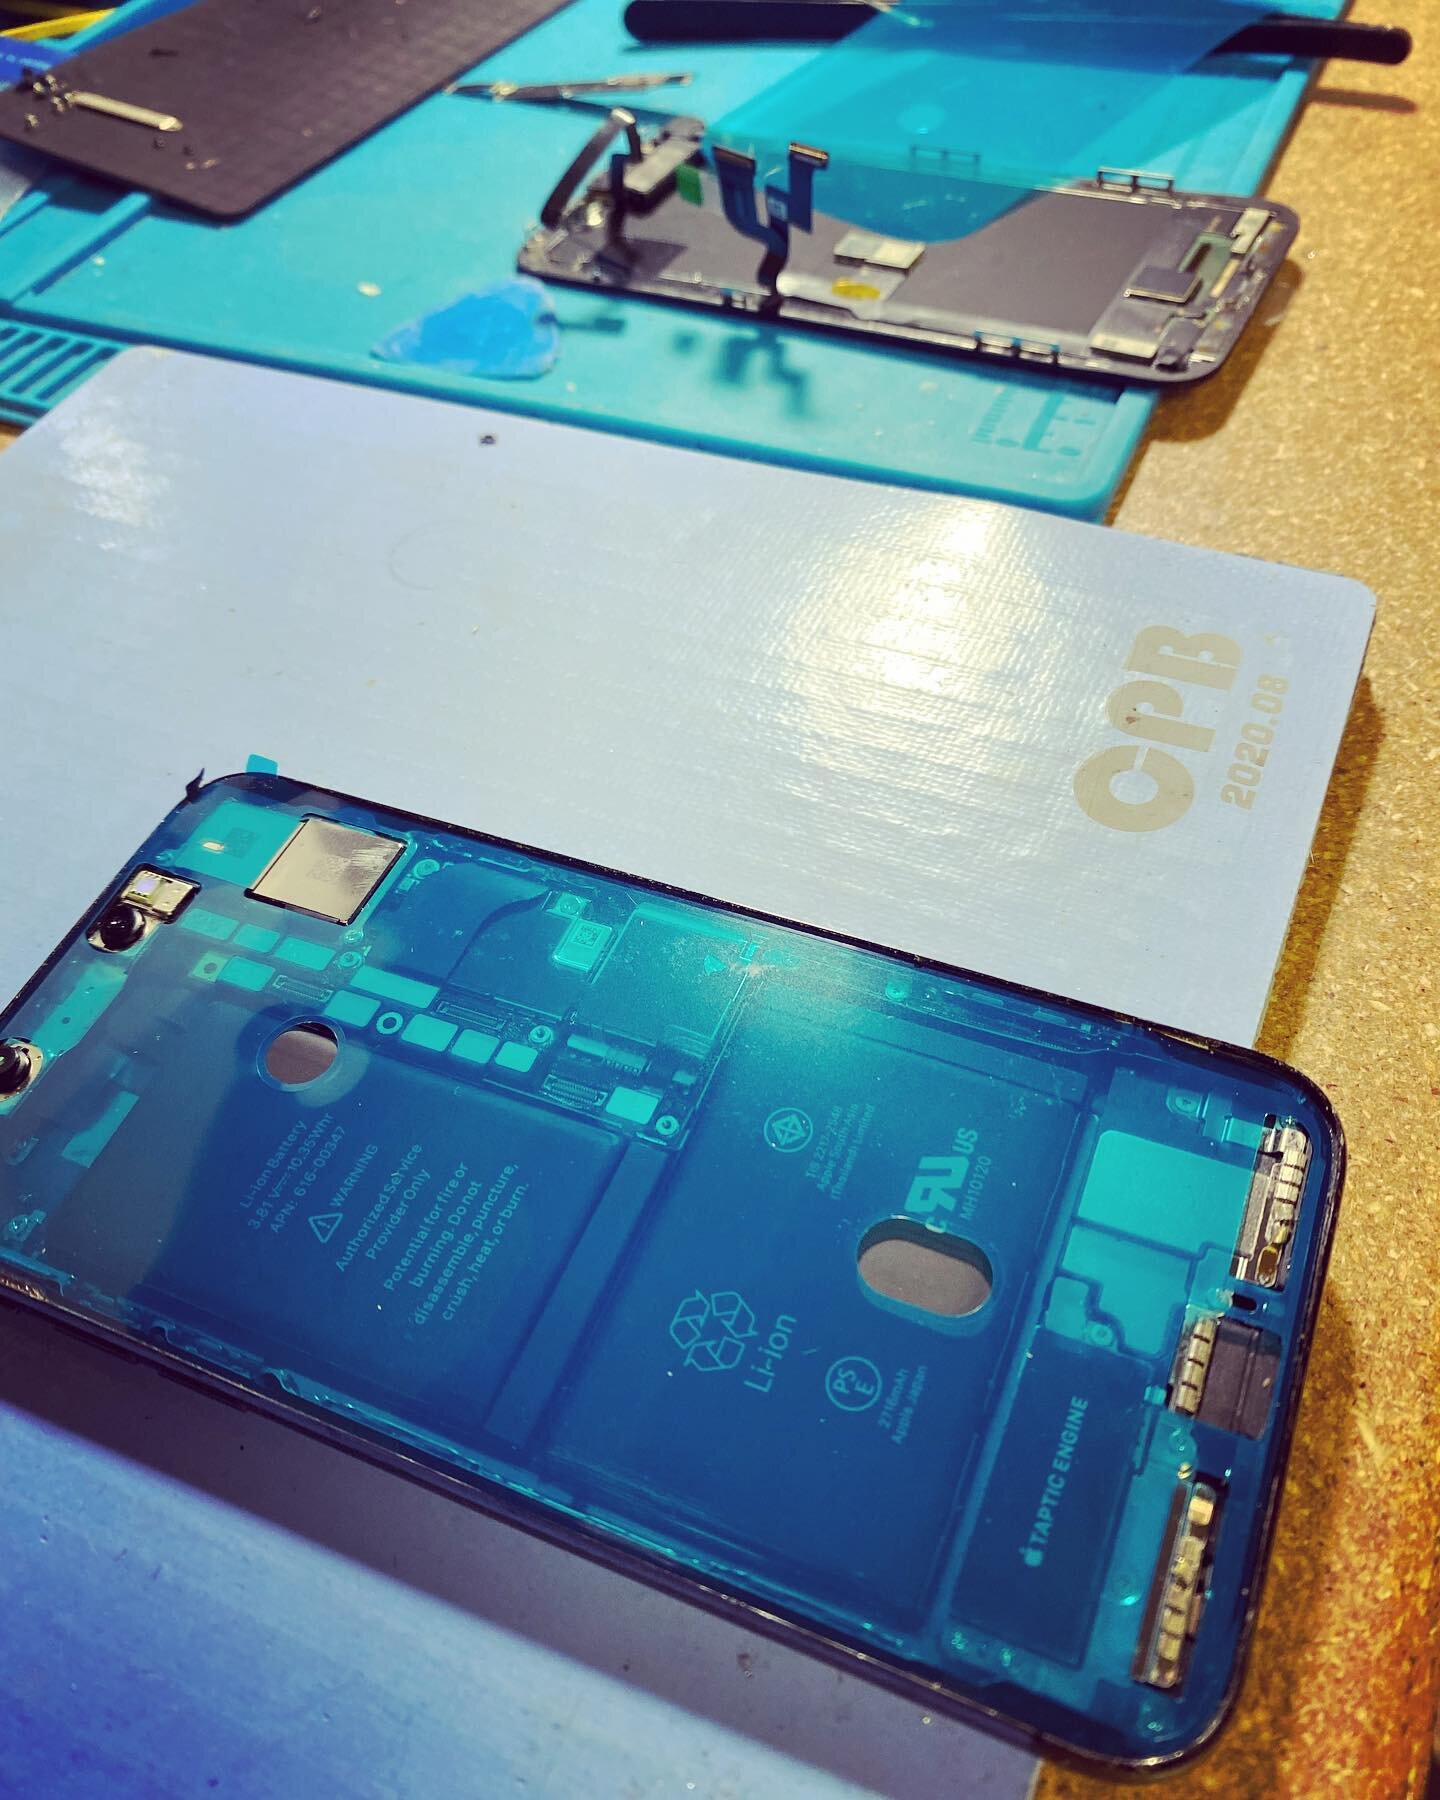 Ending off the week strong 💪🏾 with an iPhone repair! Have a great weekend everyone! 

PS. Our shop will be closed all day Monday(working a large on-site job). We&rsquo;ll be open again on Tuesday morning at 10am 🤓